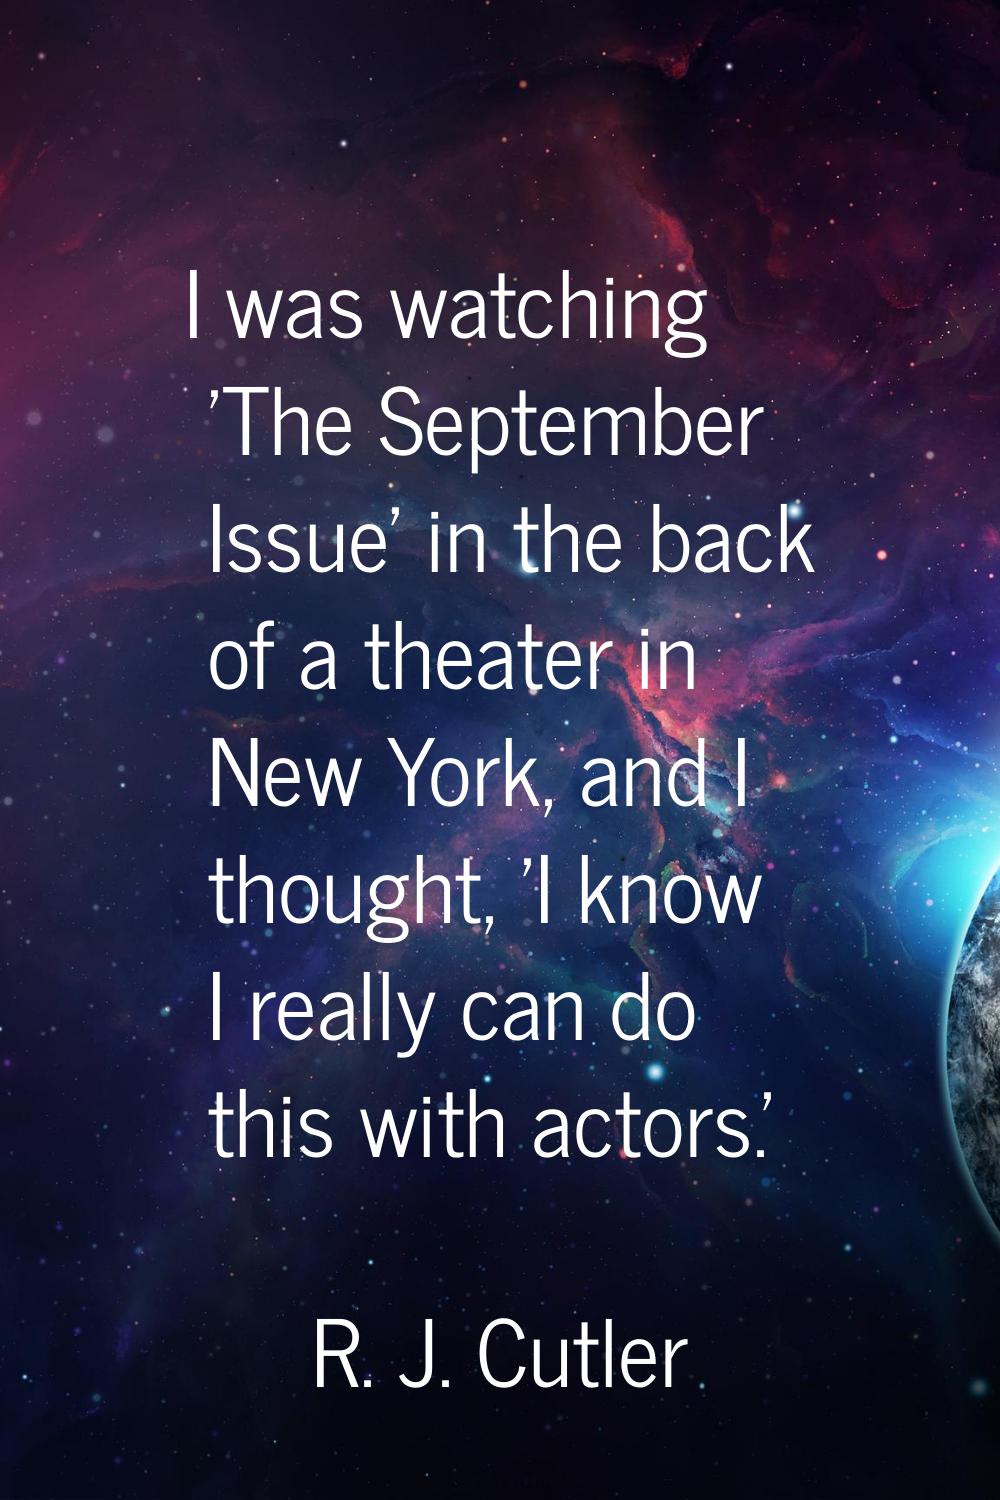 I was watching 'The September Issue' in the back of a theater in New York, and I thought, 'I know I